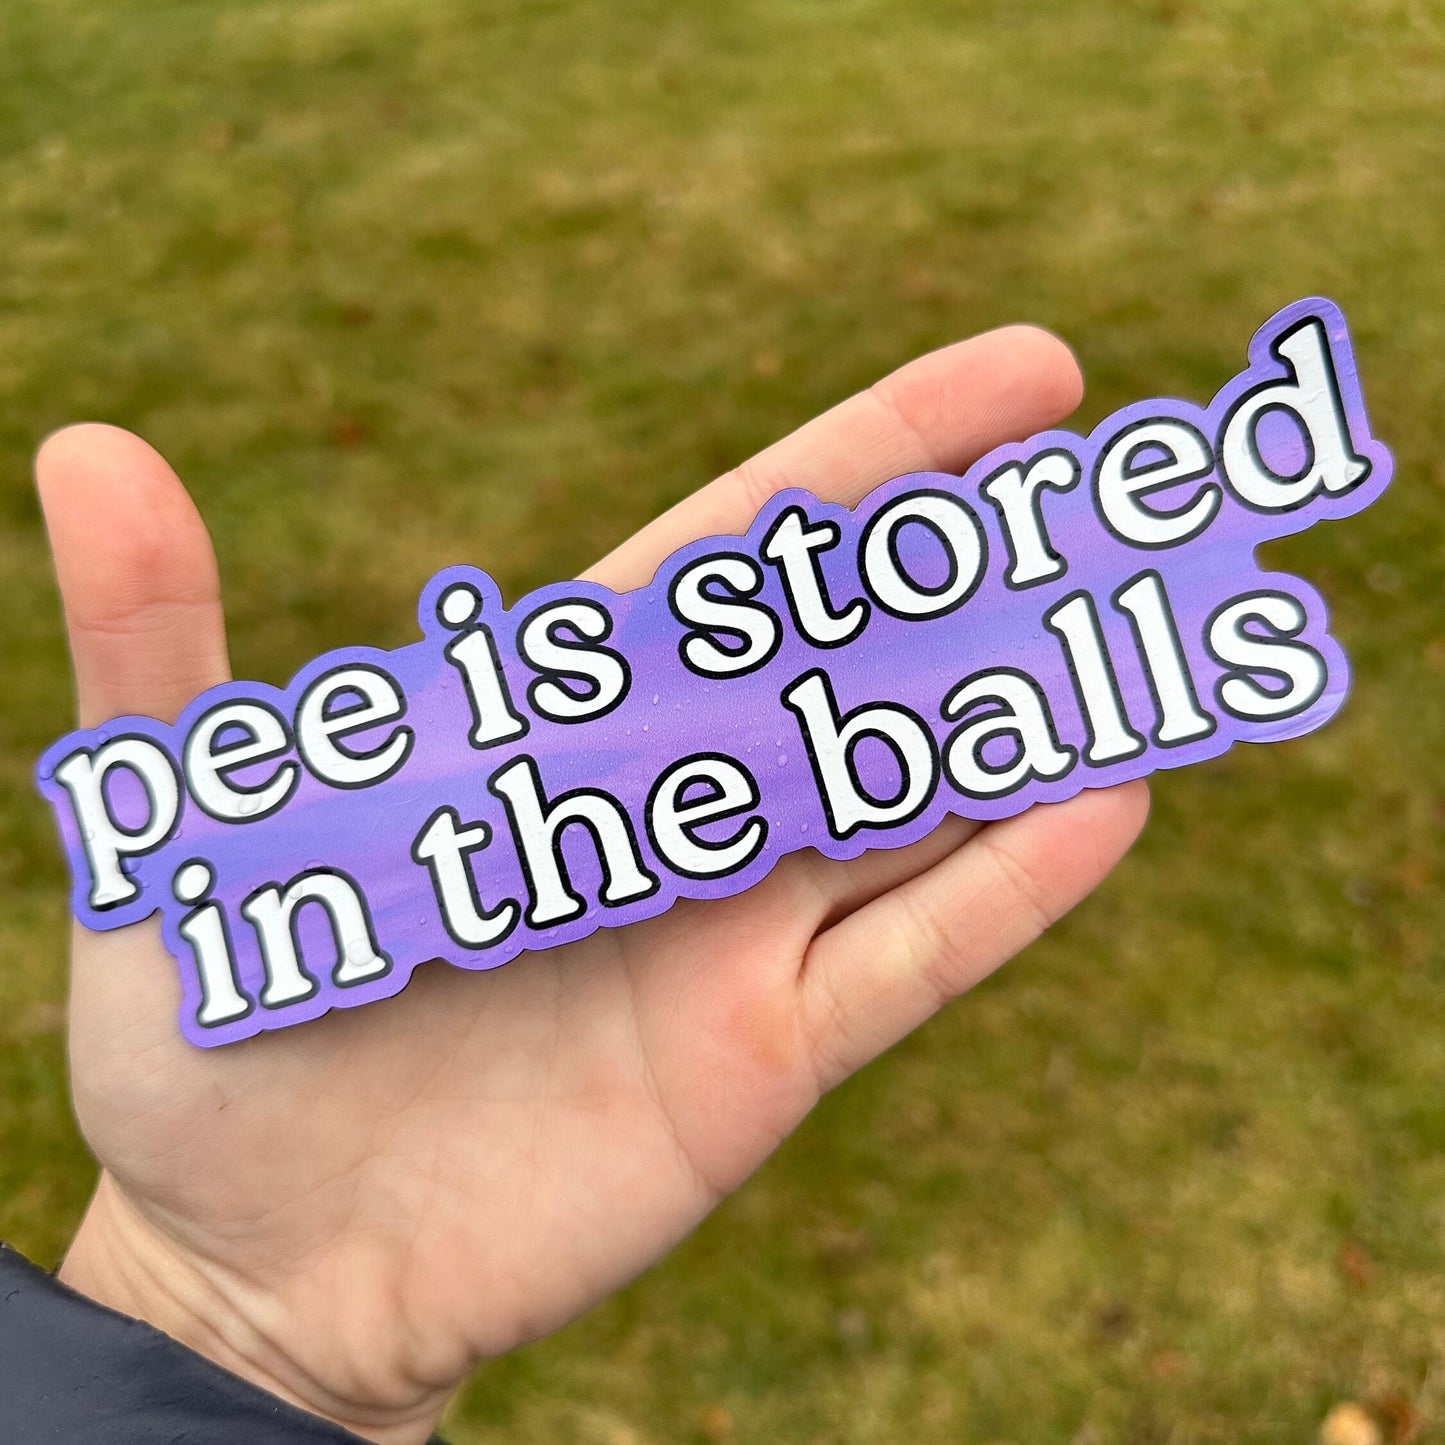 Pee Is Stored In The Balls Car Magnet